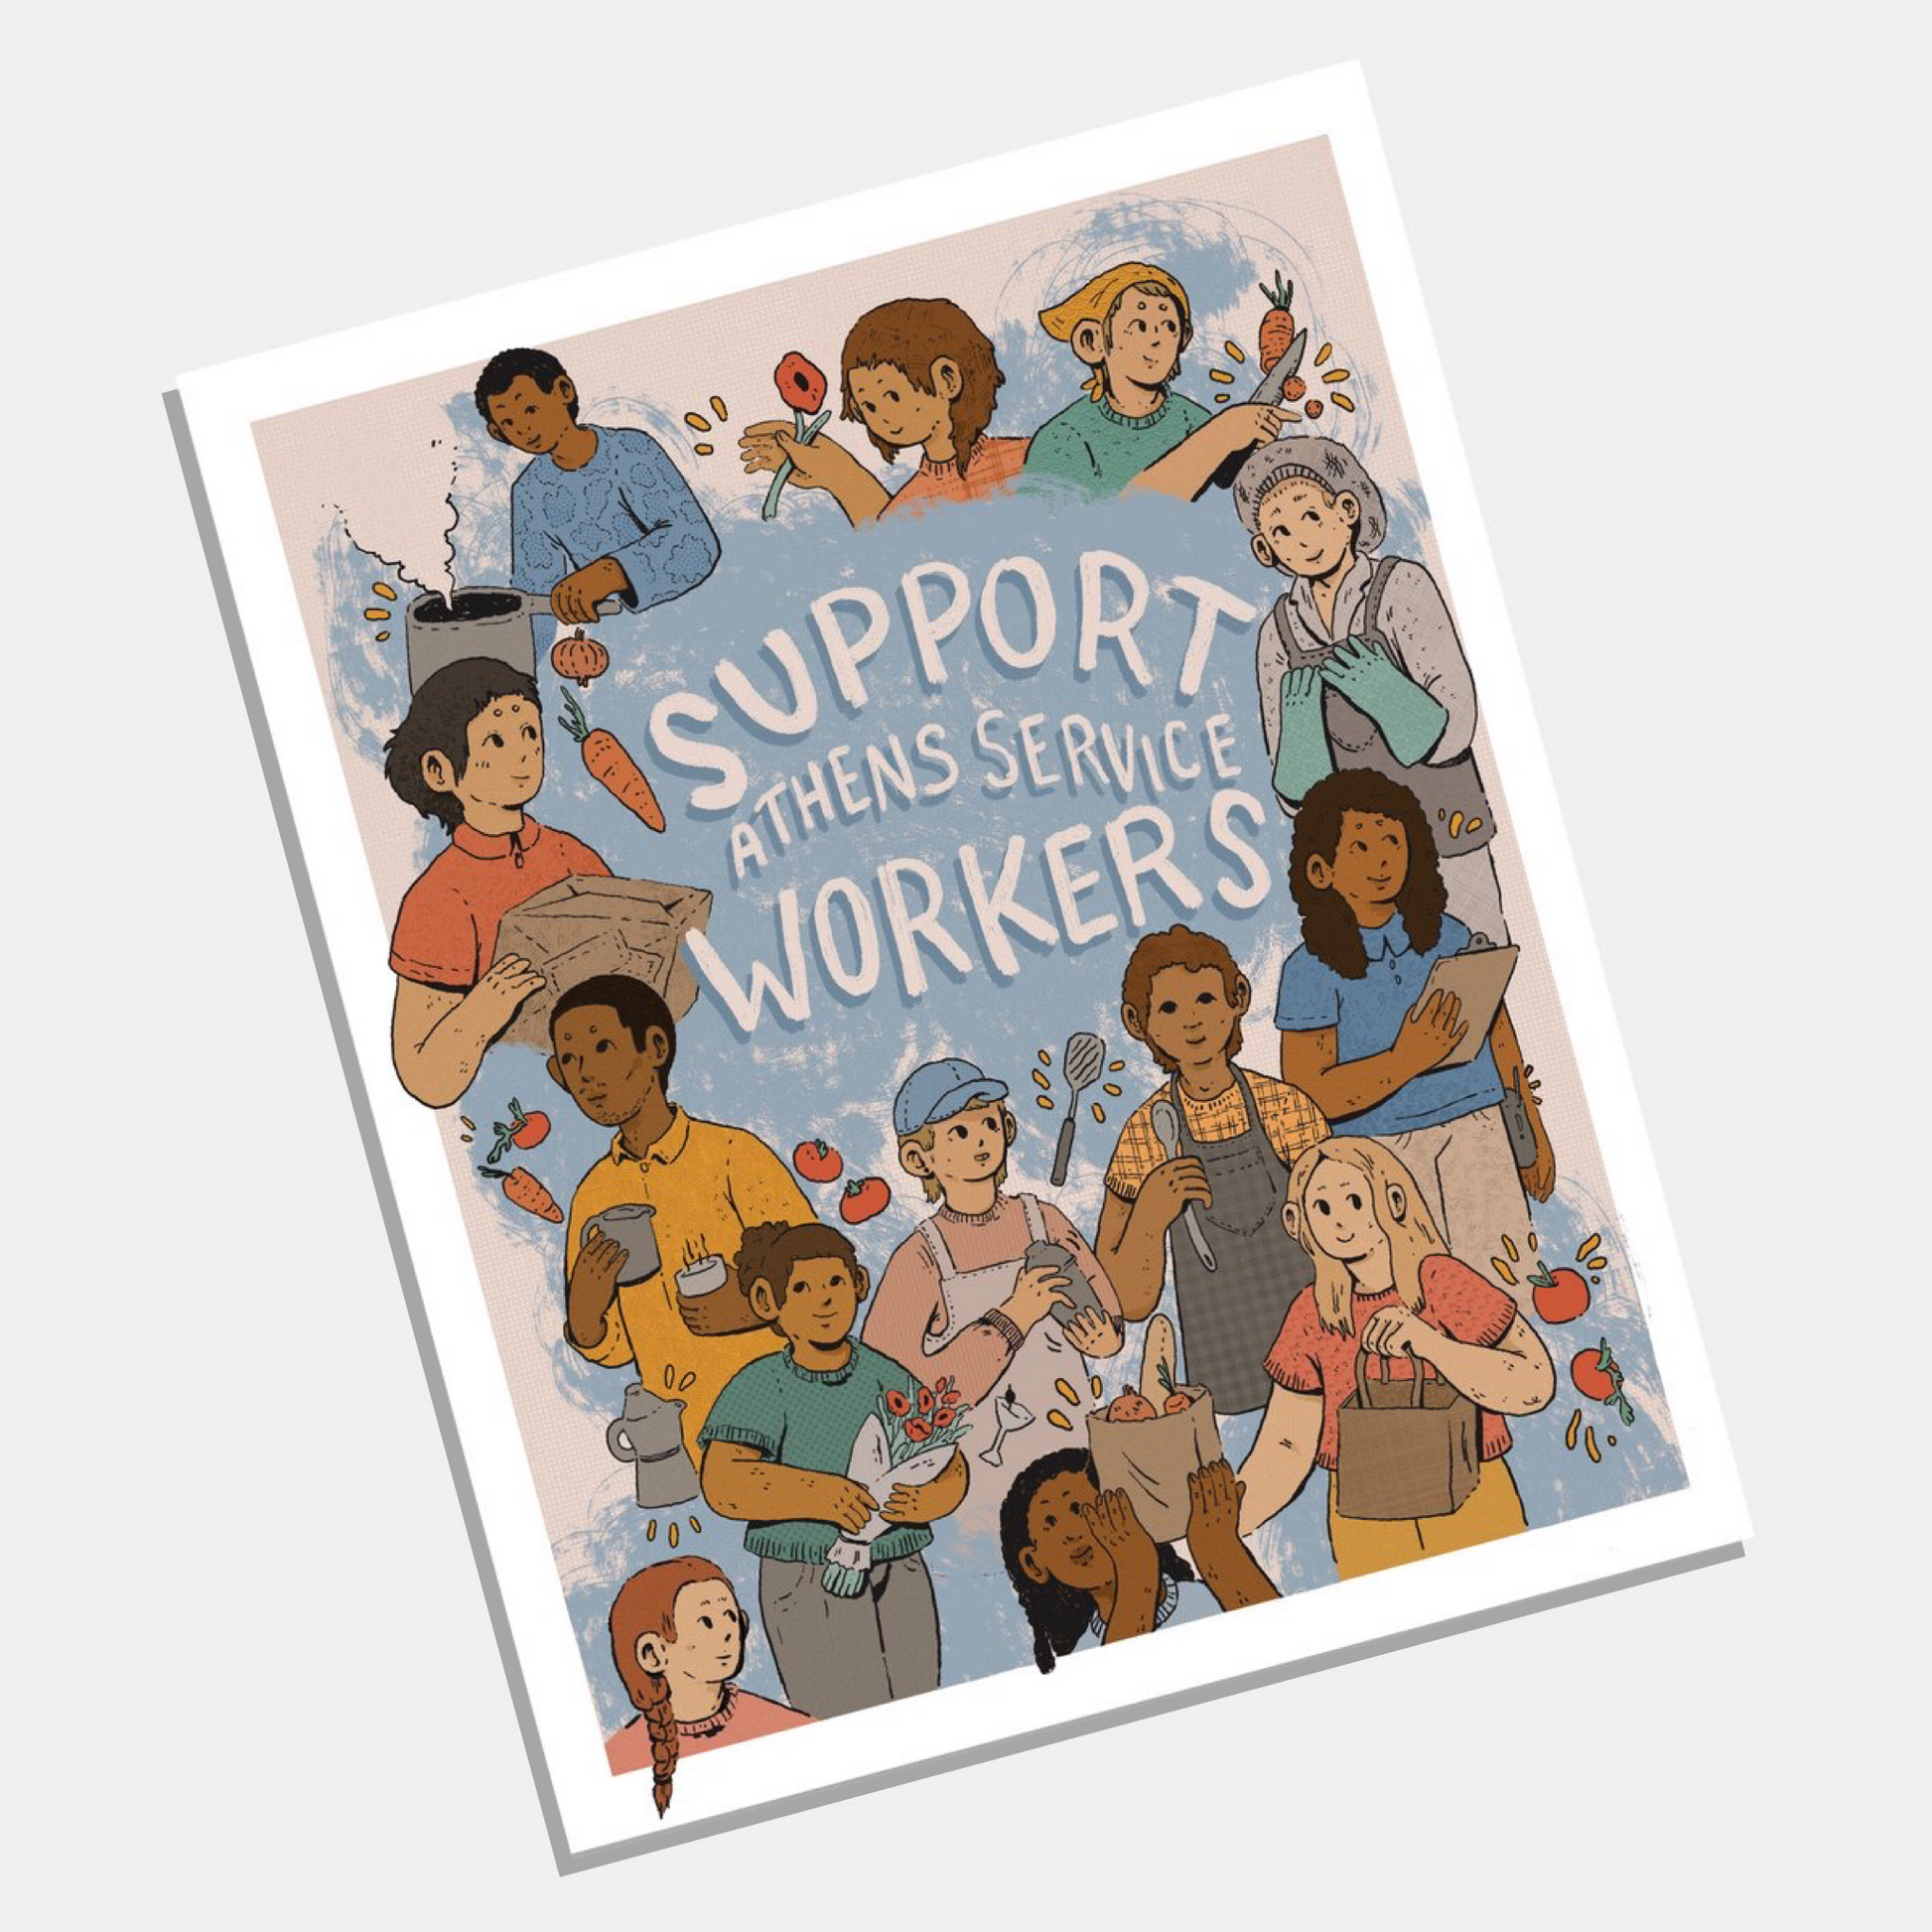 Athens Banner Project: Archival Print of "Support Athens Service Workers" by Klée Schell - by Klée Schell - K. A. Artist Shop